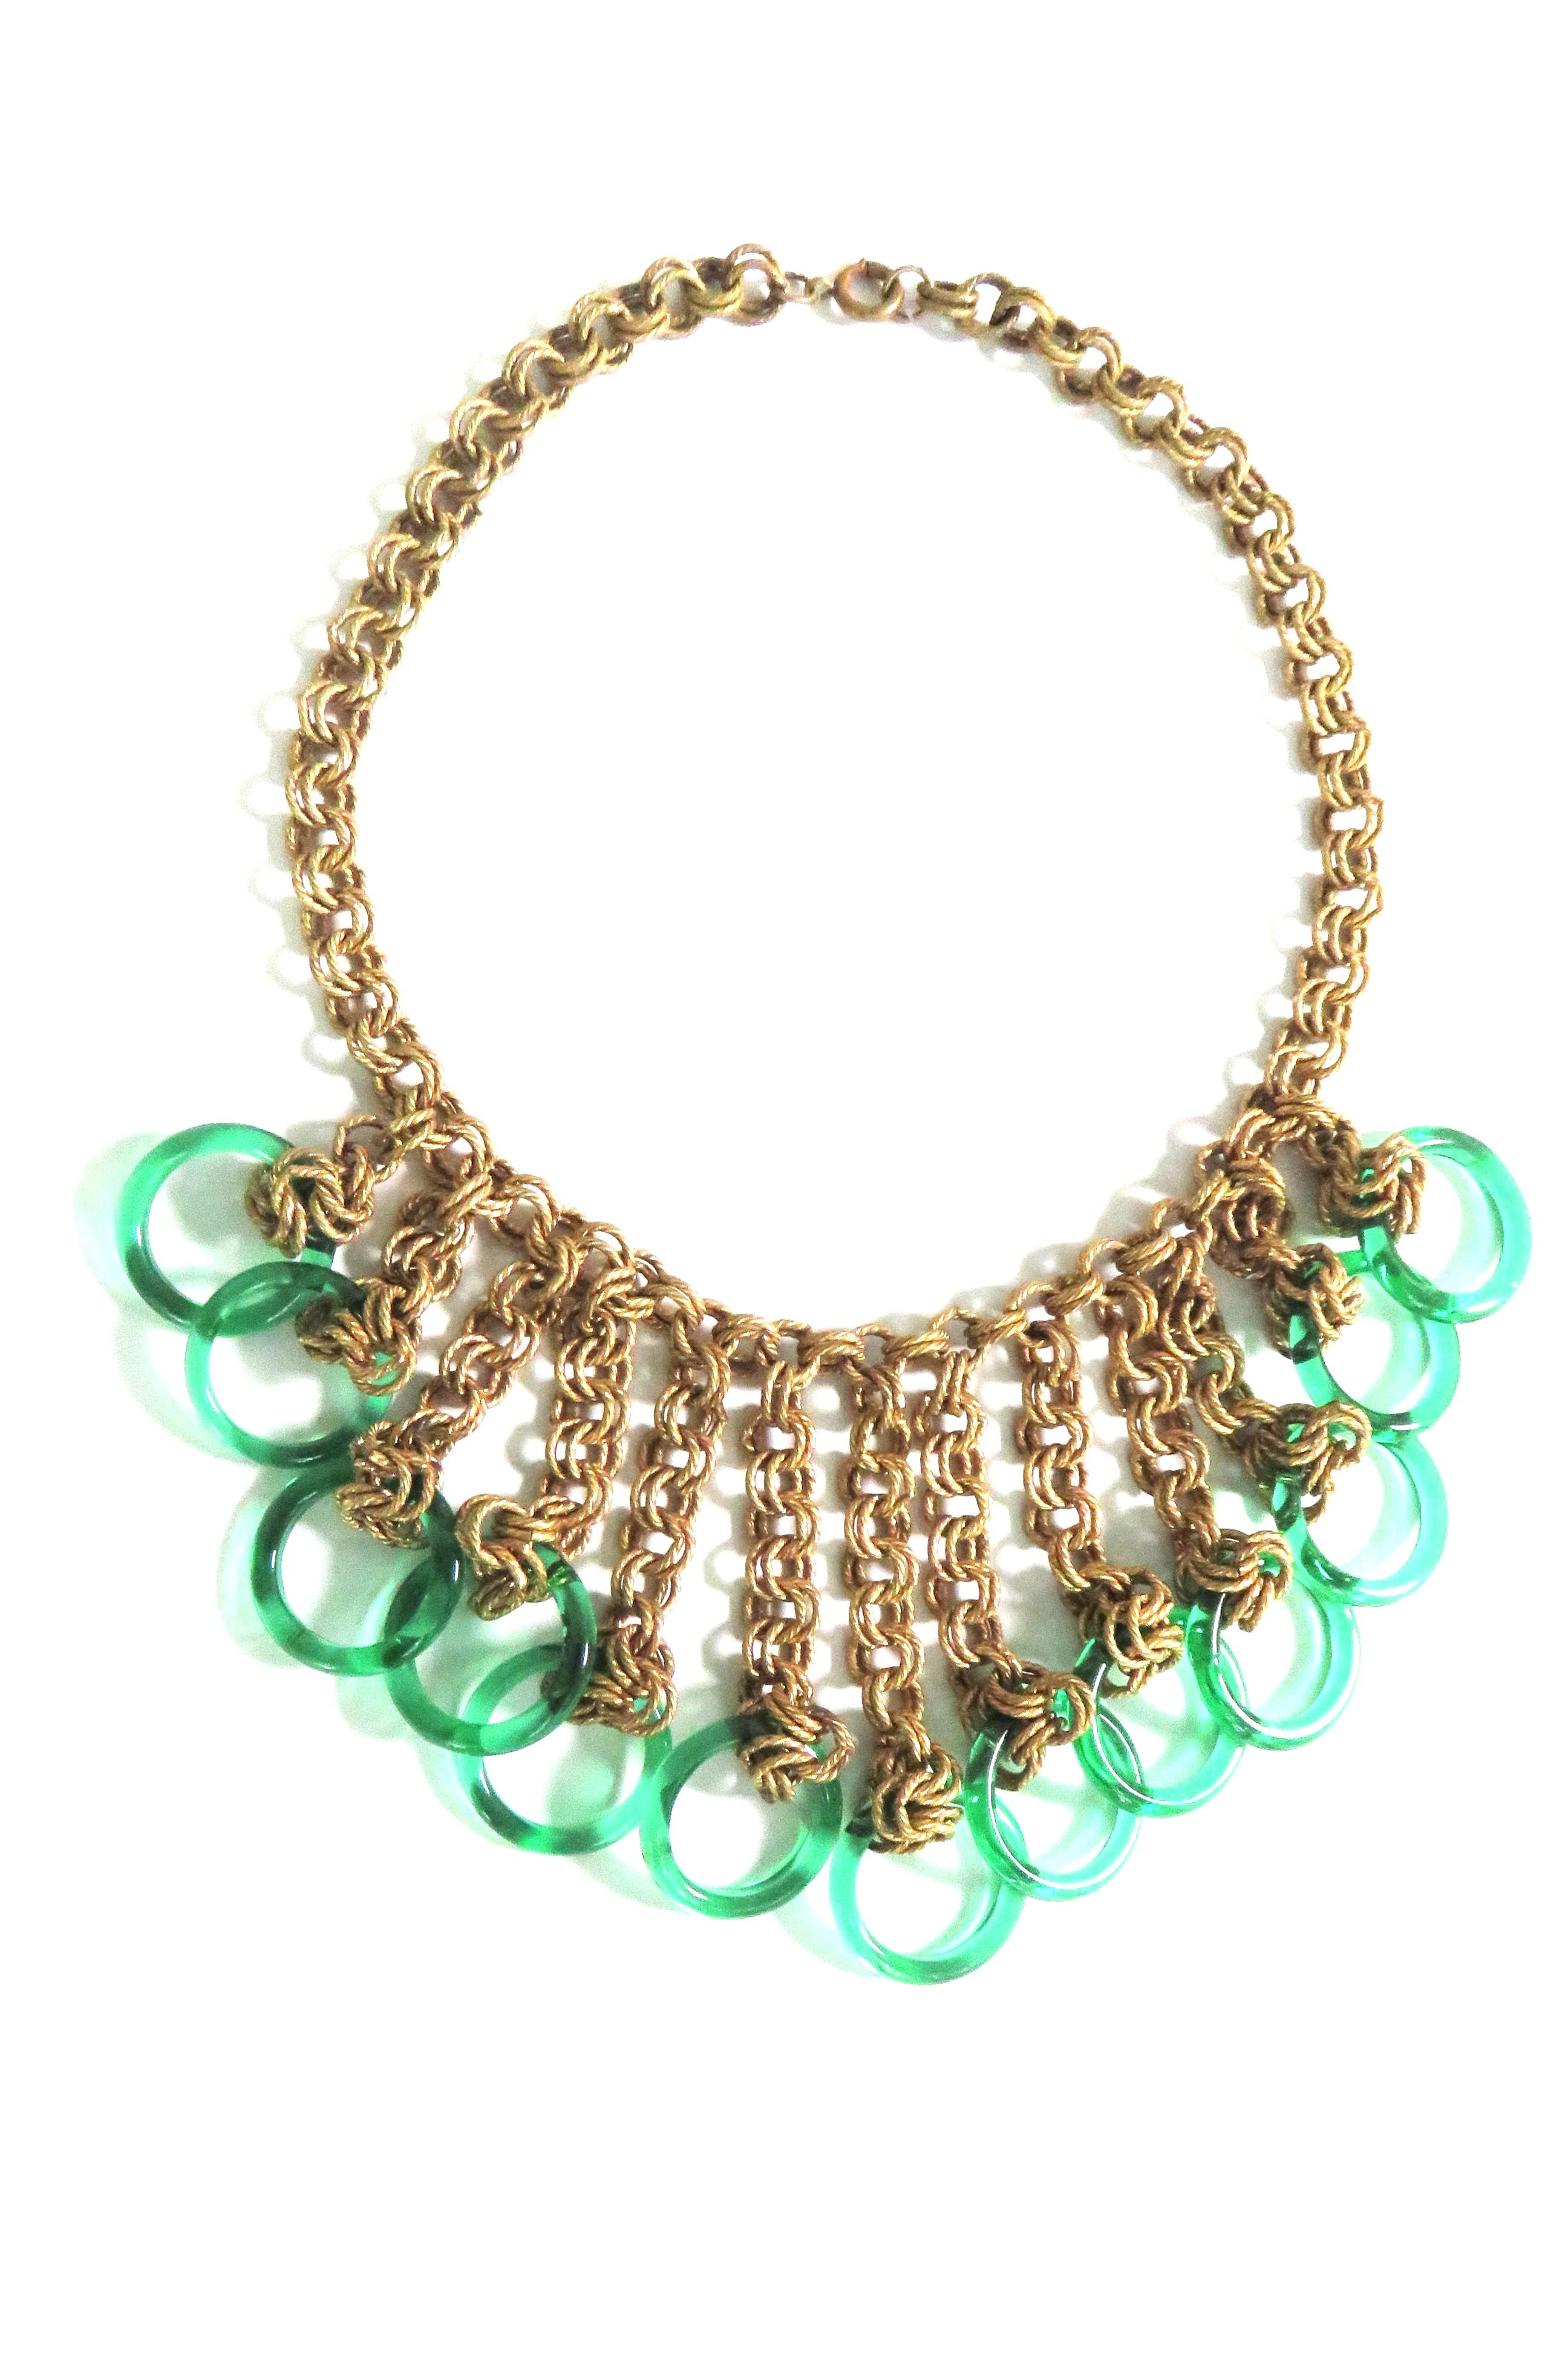 A gorgeous gold chain choker with green circles. The gold interwoven rope chain has a center front gradated chain bib with 1